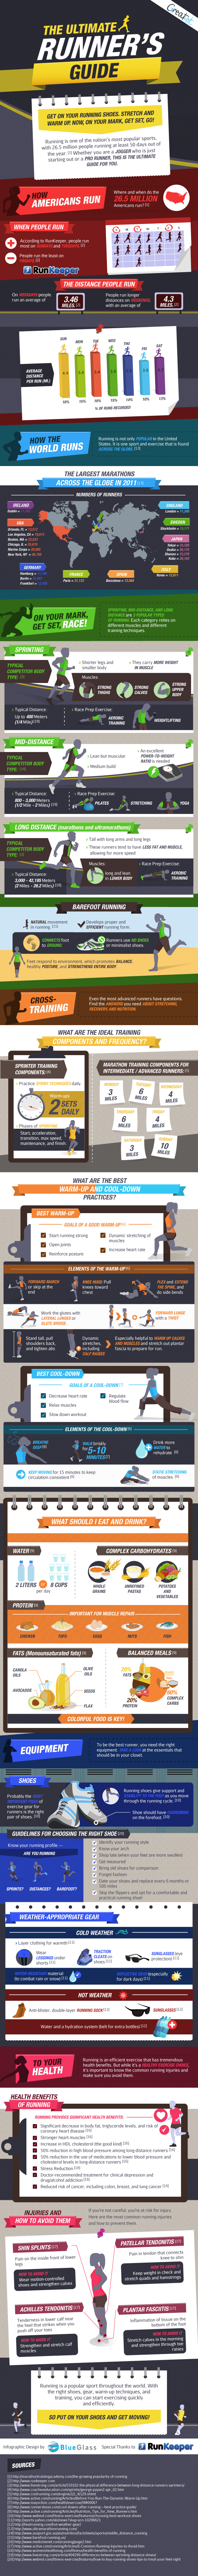 The Ultimate Runners Guide